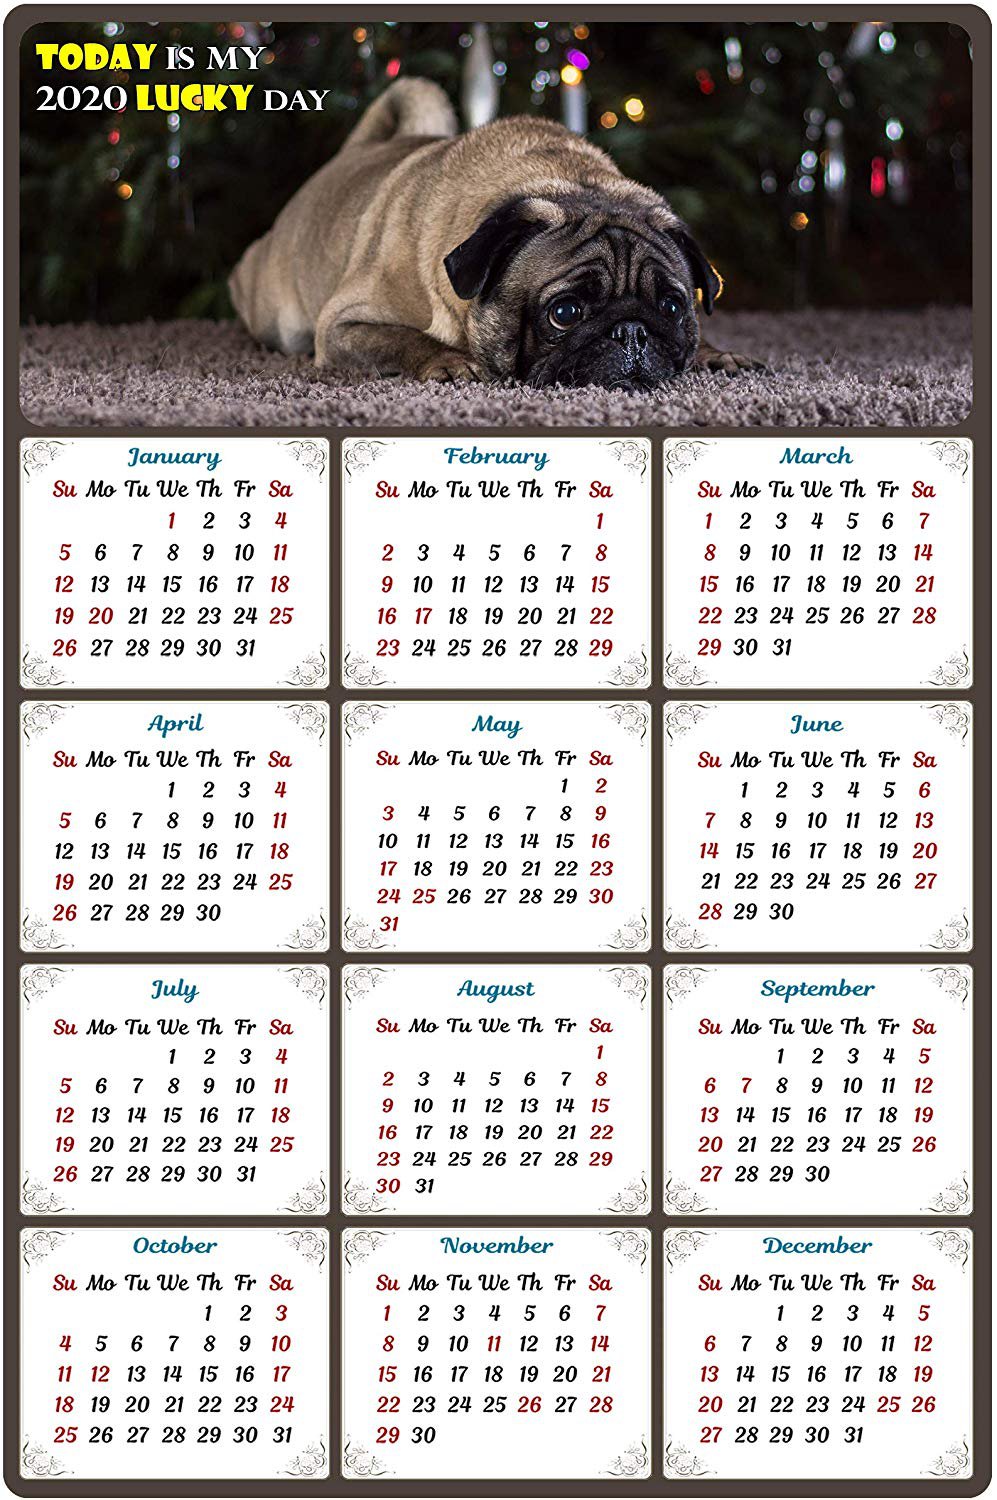 2020 Magnetic Calendar - Calendar Magnets - Today is My Lucky Day - Dog Themed 2